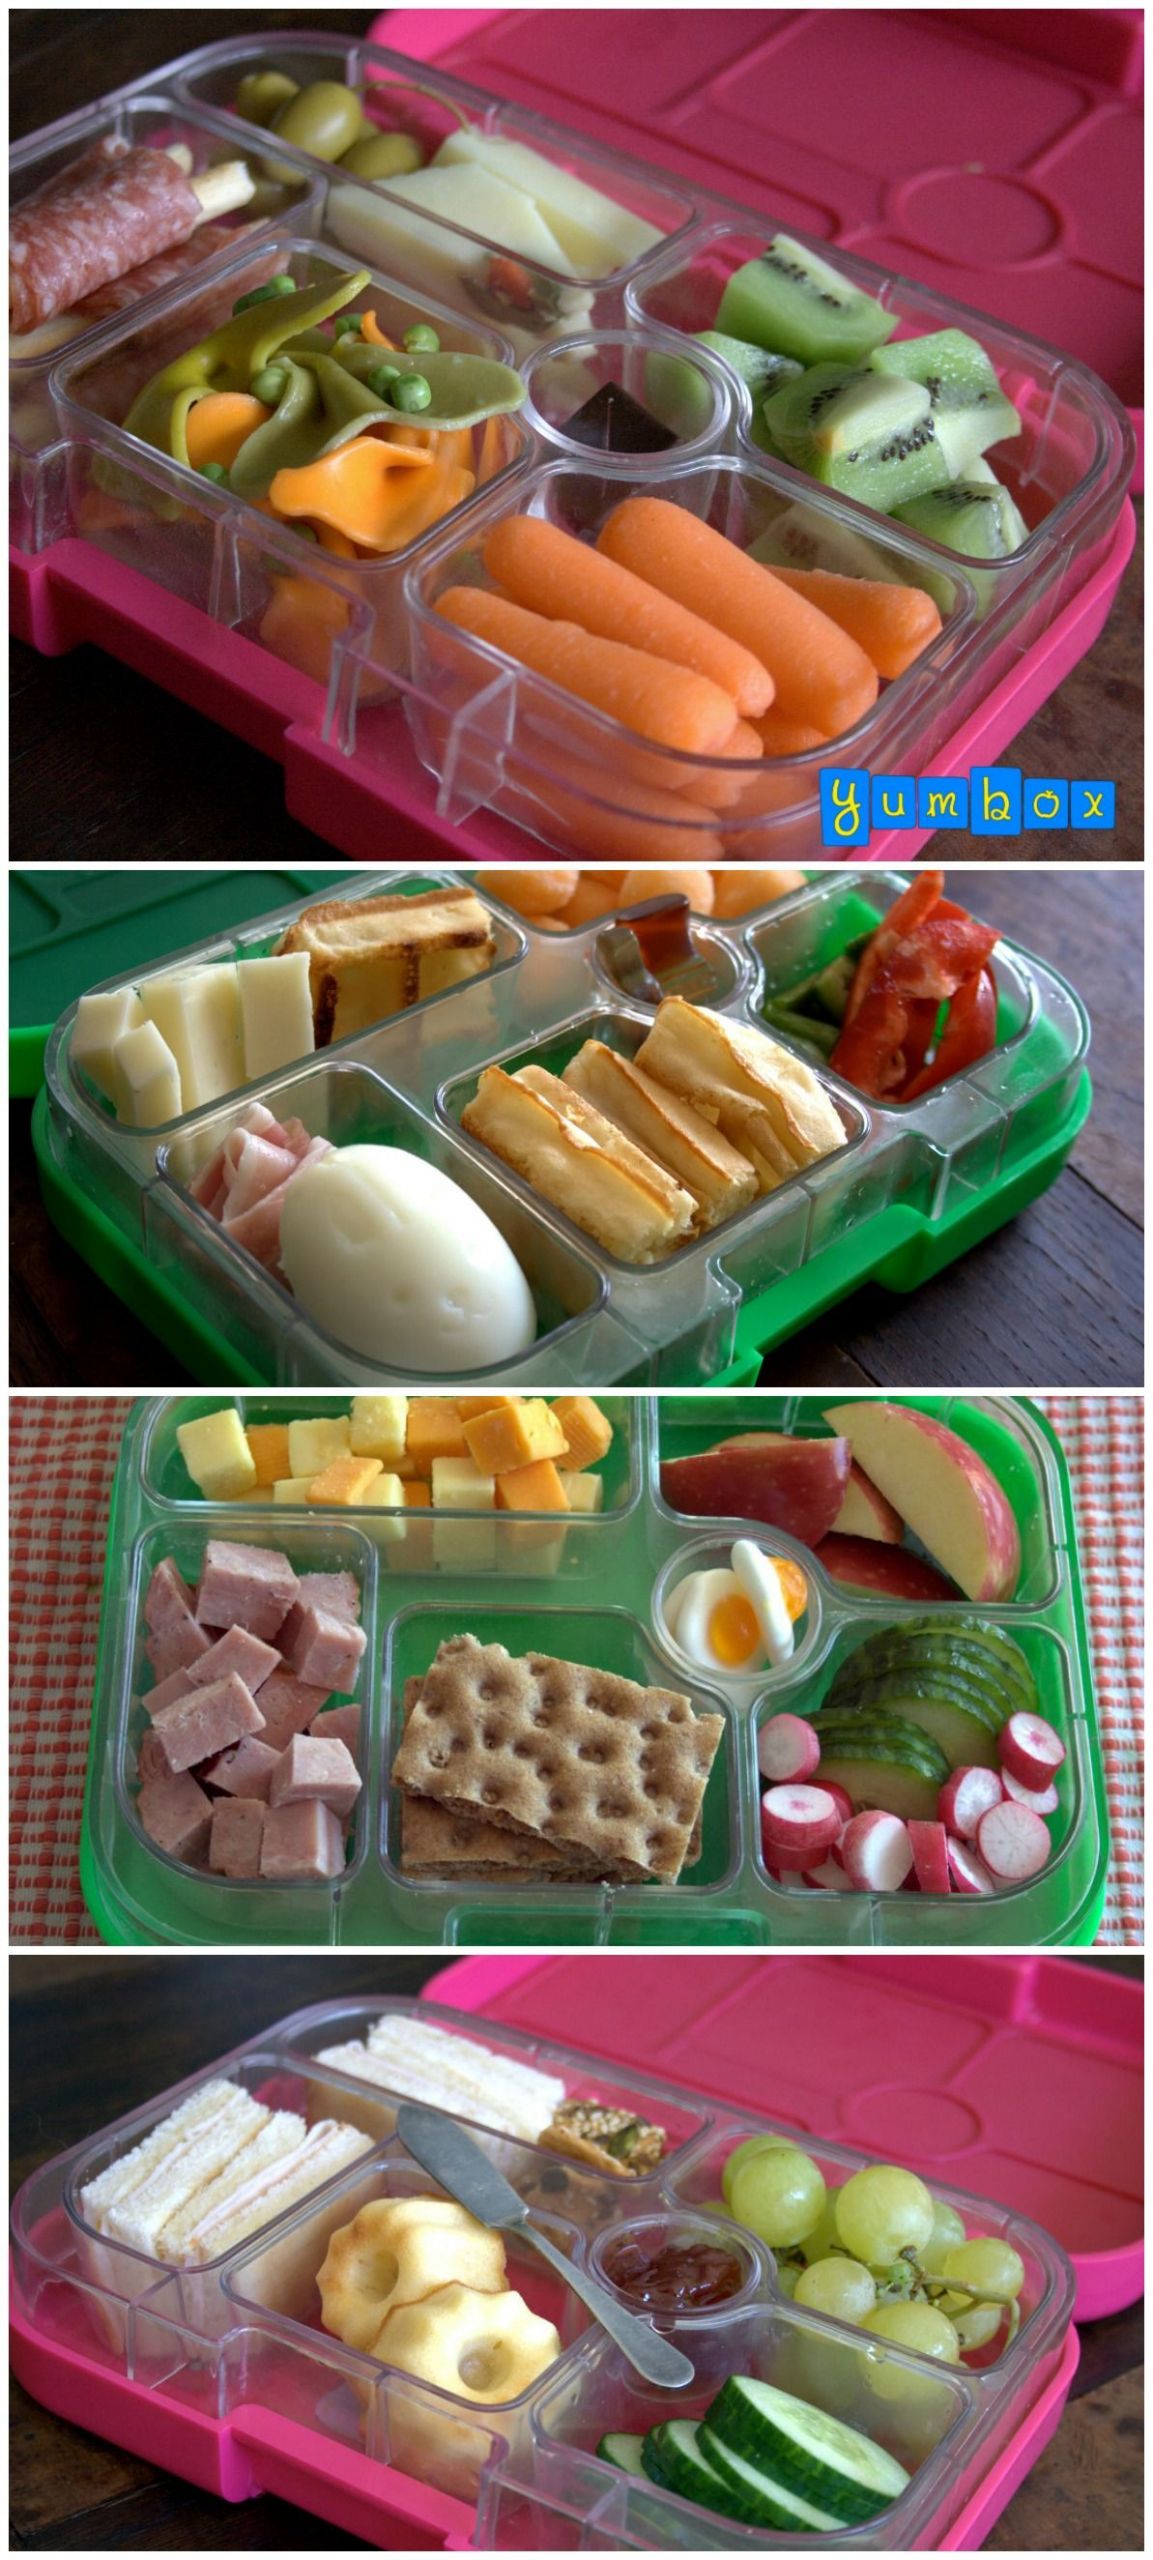 Healthy Packed Lunches For Kids
 Tips for simple healthy and delicious packed school or